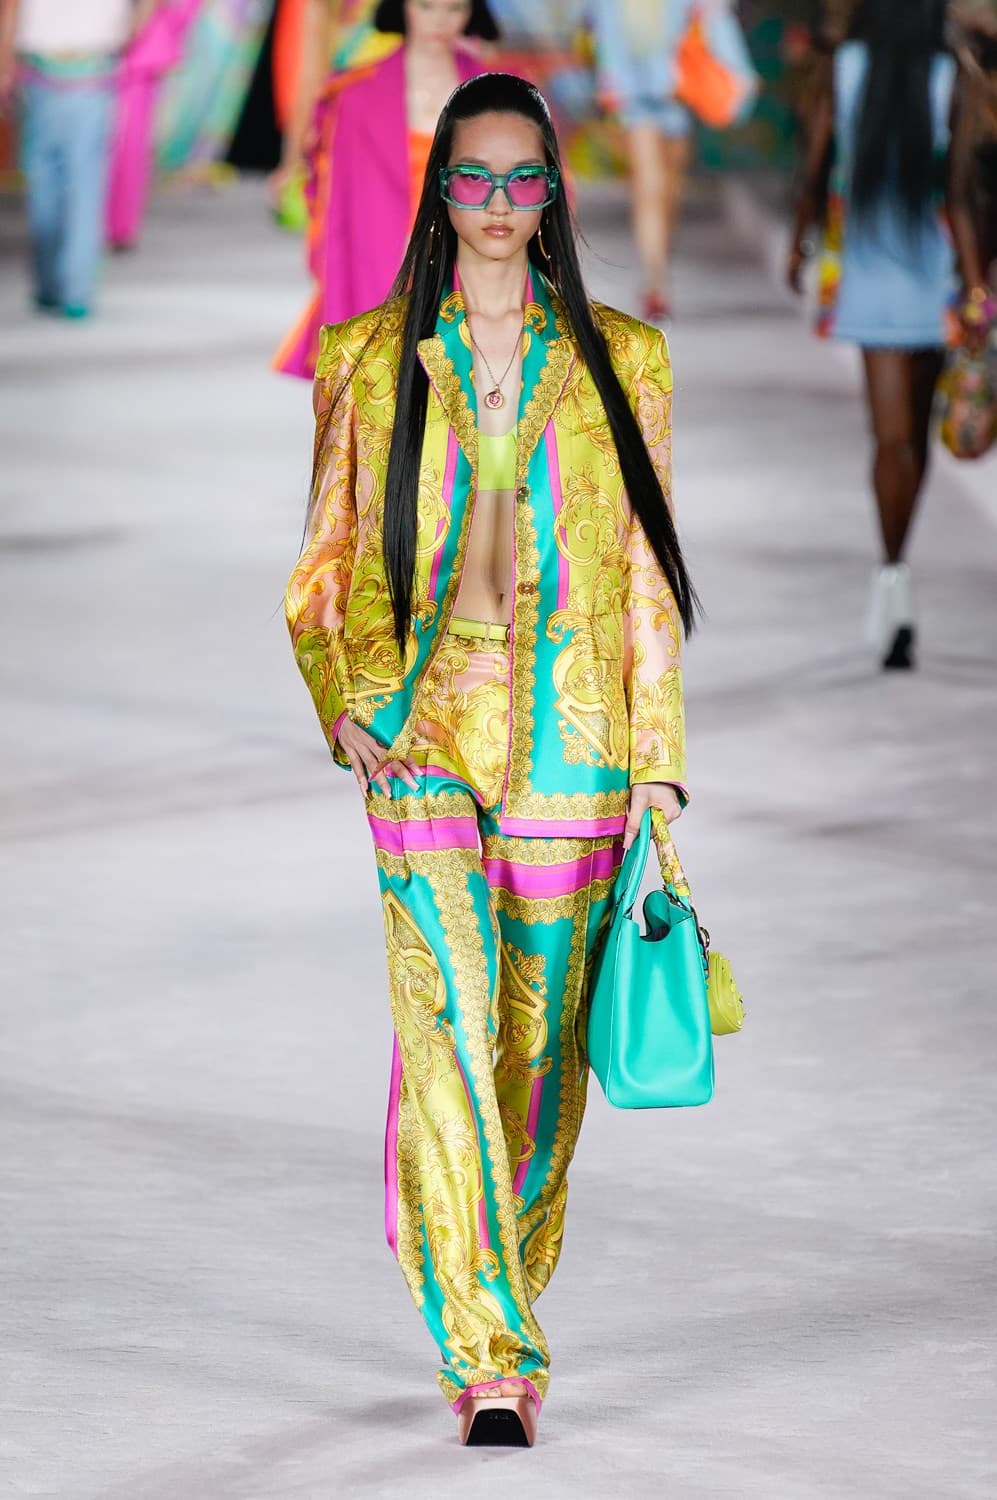 Top 20 Most Popular Runway Models of Spring 2022 | The Impression